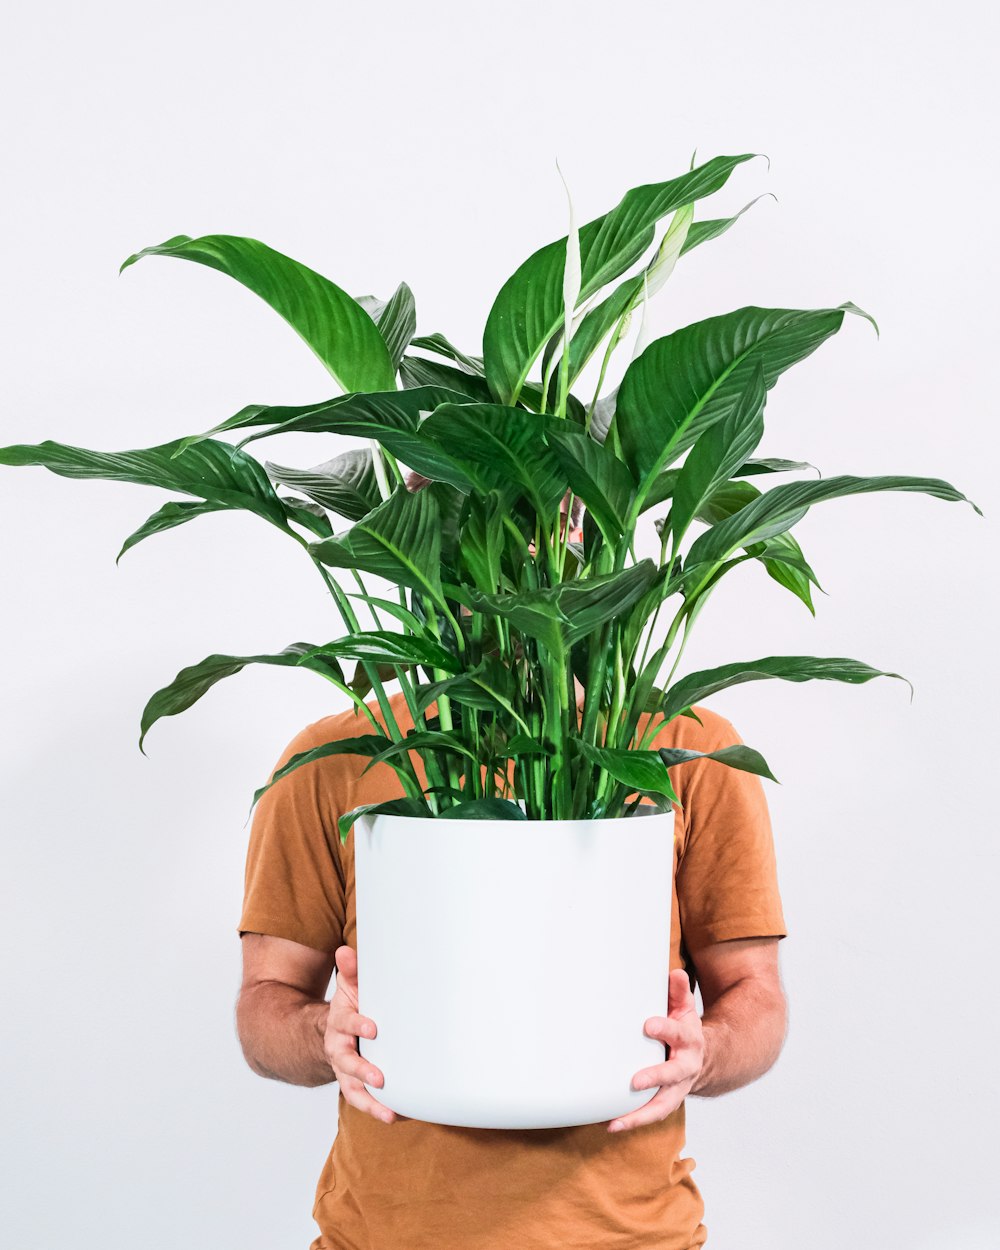 Spathiphyllum Pictures | Download Free Images on Unsplash